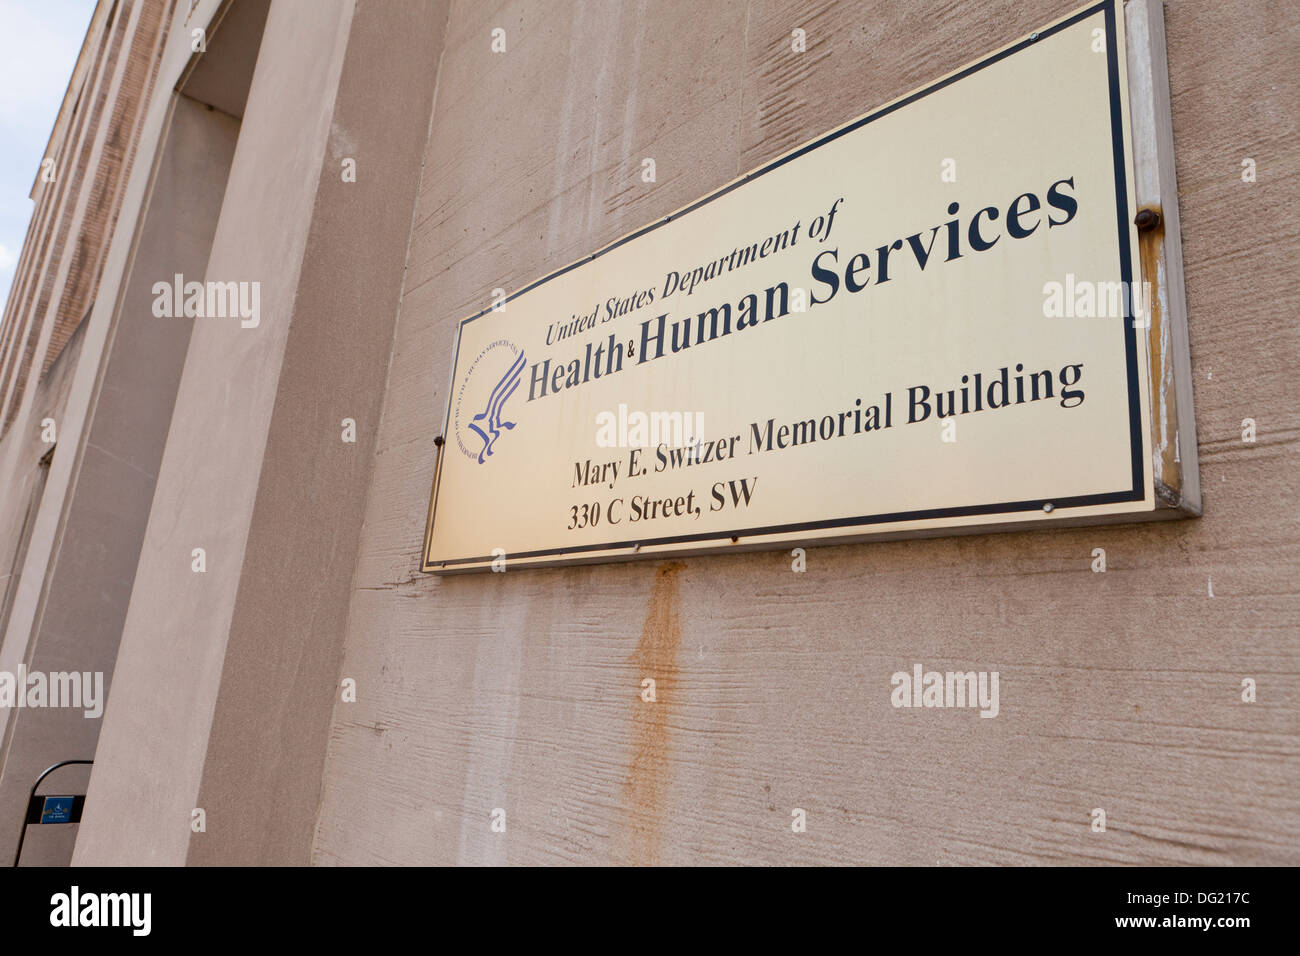 U.S. Department of Health And Human Services zentrale Gebäude (DHHS / HHS)-Washington, DC USA Stockfoto